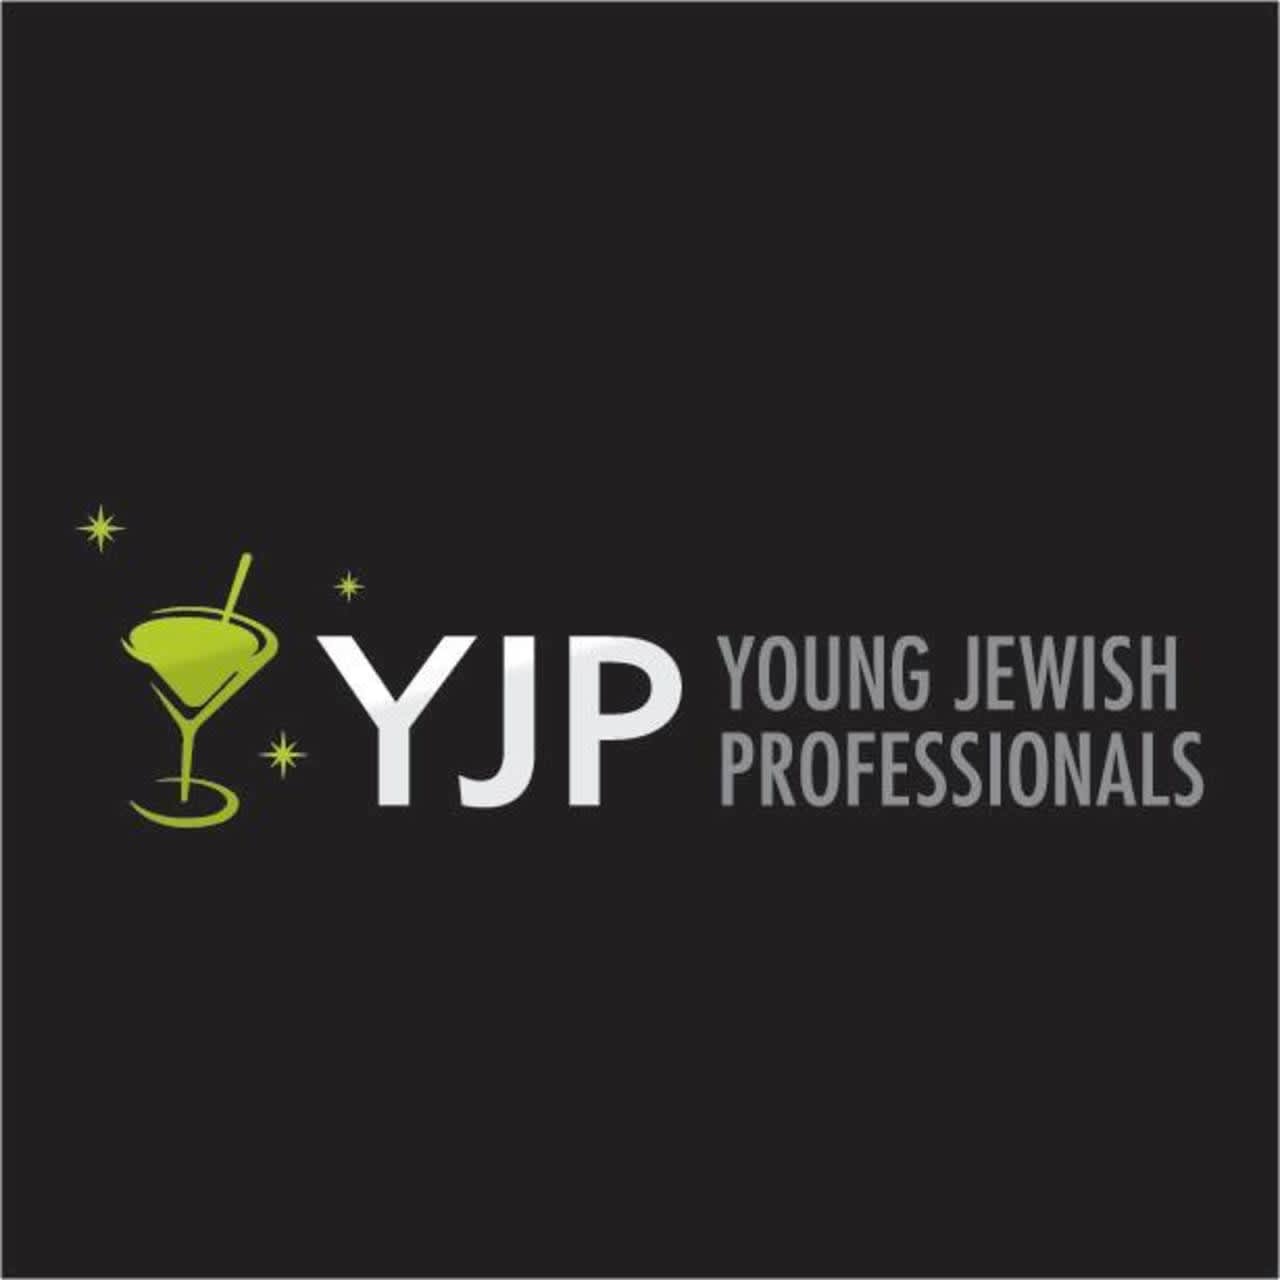 The Young Jewish Professionals, Connecticut will host a Chanukah party Dec. 29 in South Norwalk.